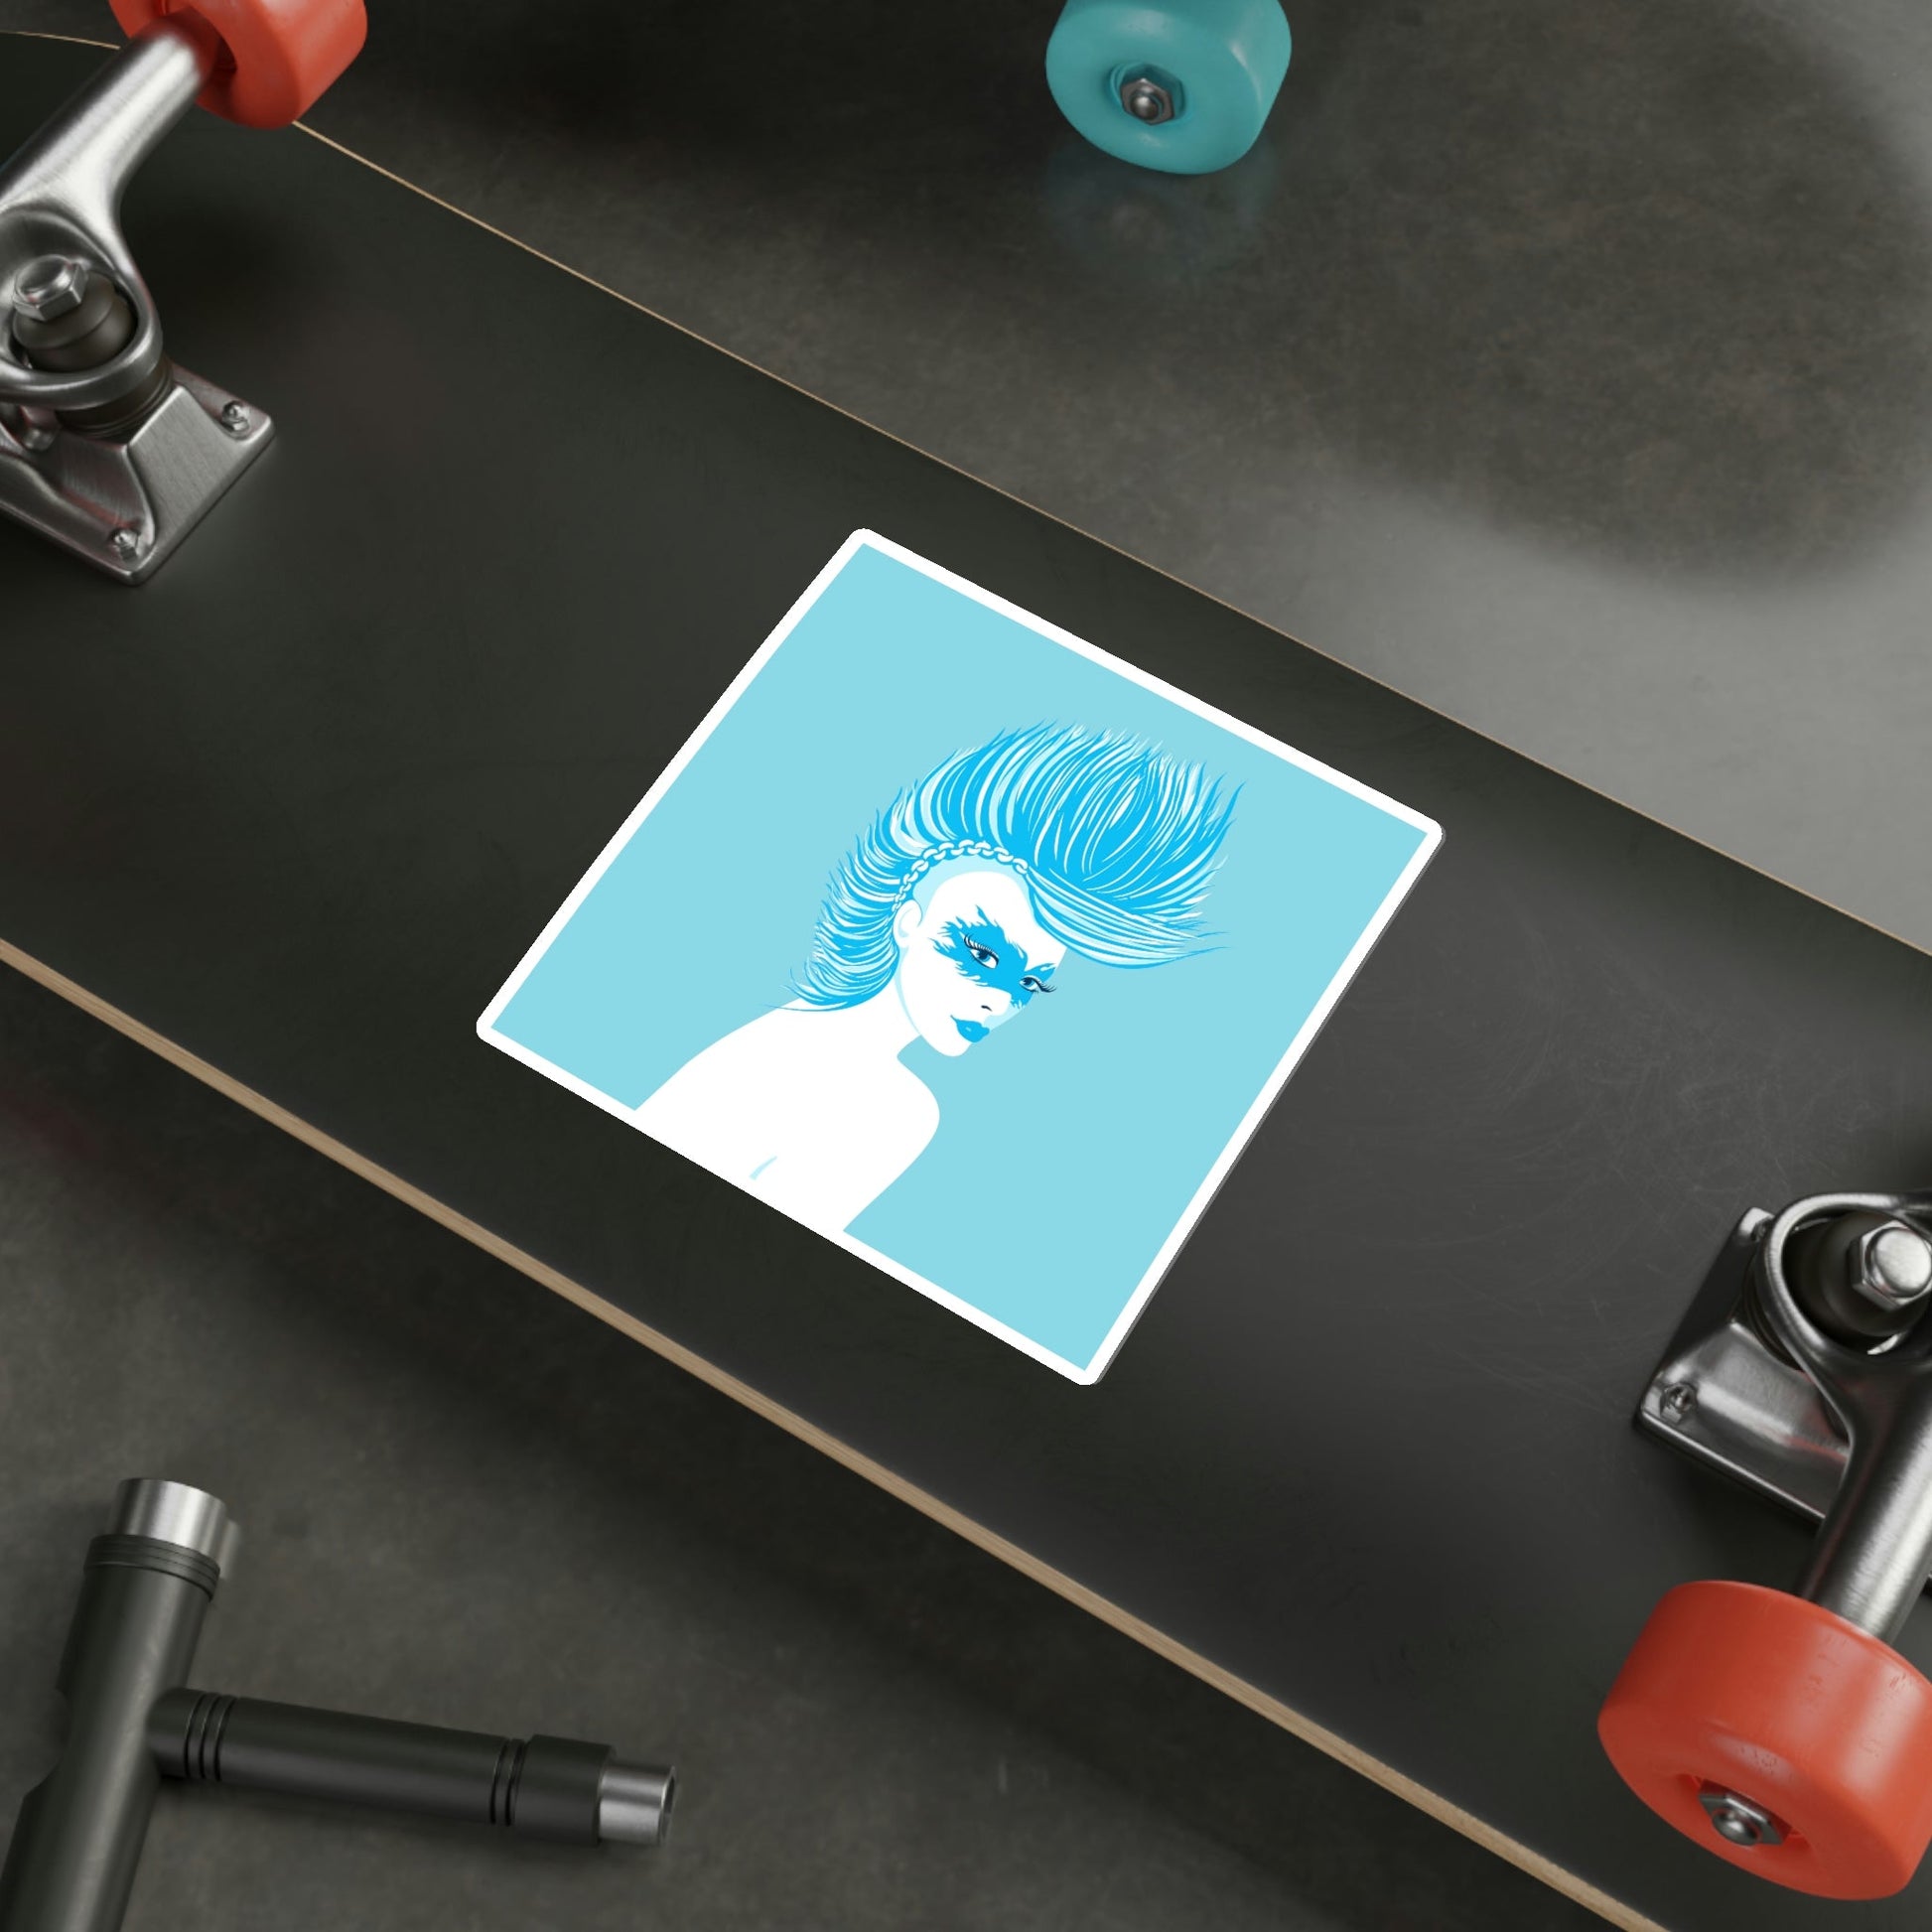 Blue Punk Woman Art Unique Edgy Graphic Die-Cut Sticker Ichaku [Perfect Gifts Selection]